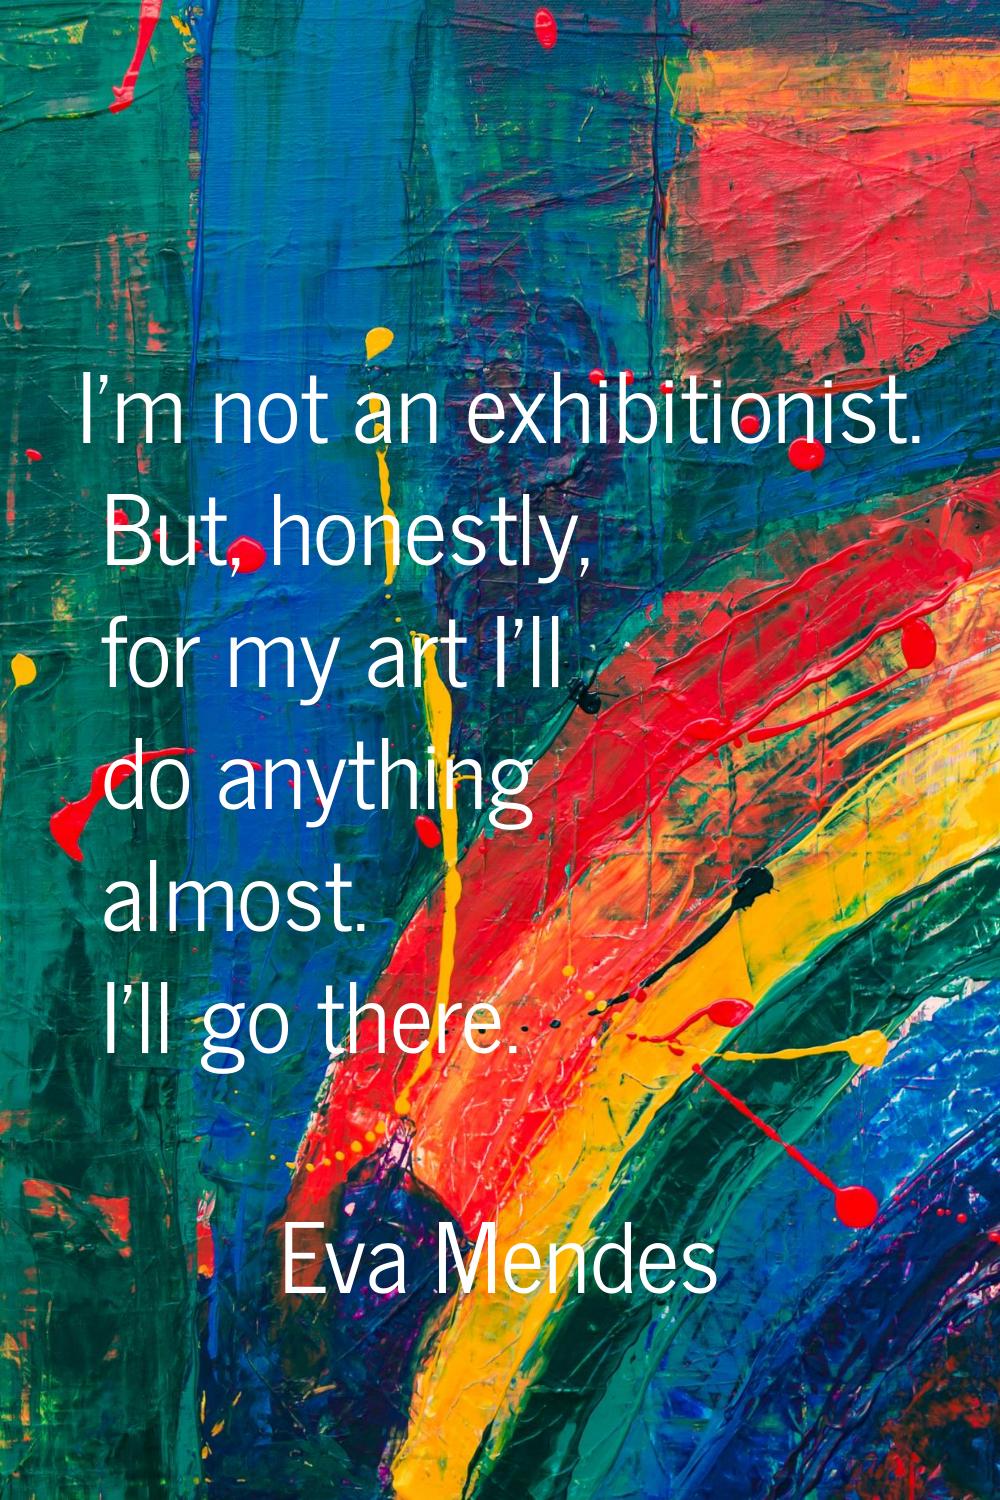 I'm not an exhibitionist. But, honestly, for my art I'll do anything almost. I'll go there.